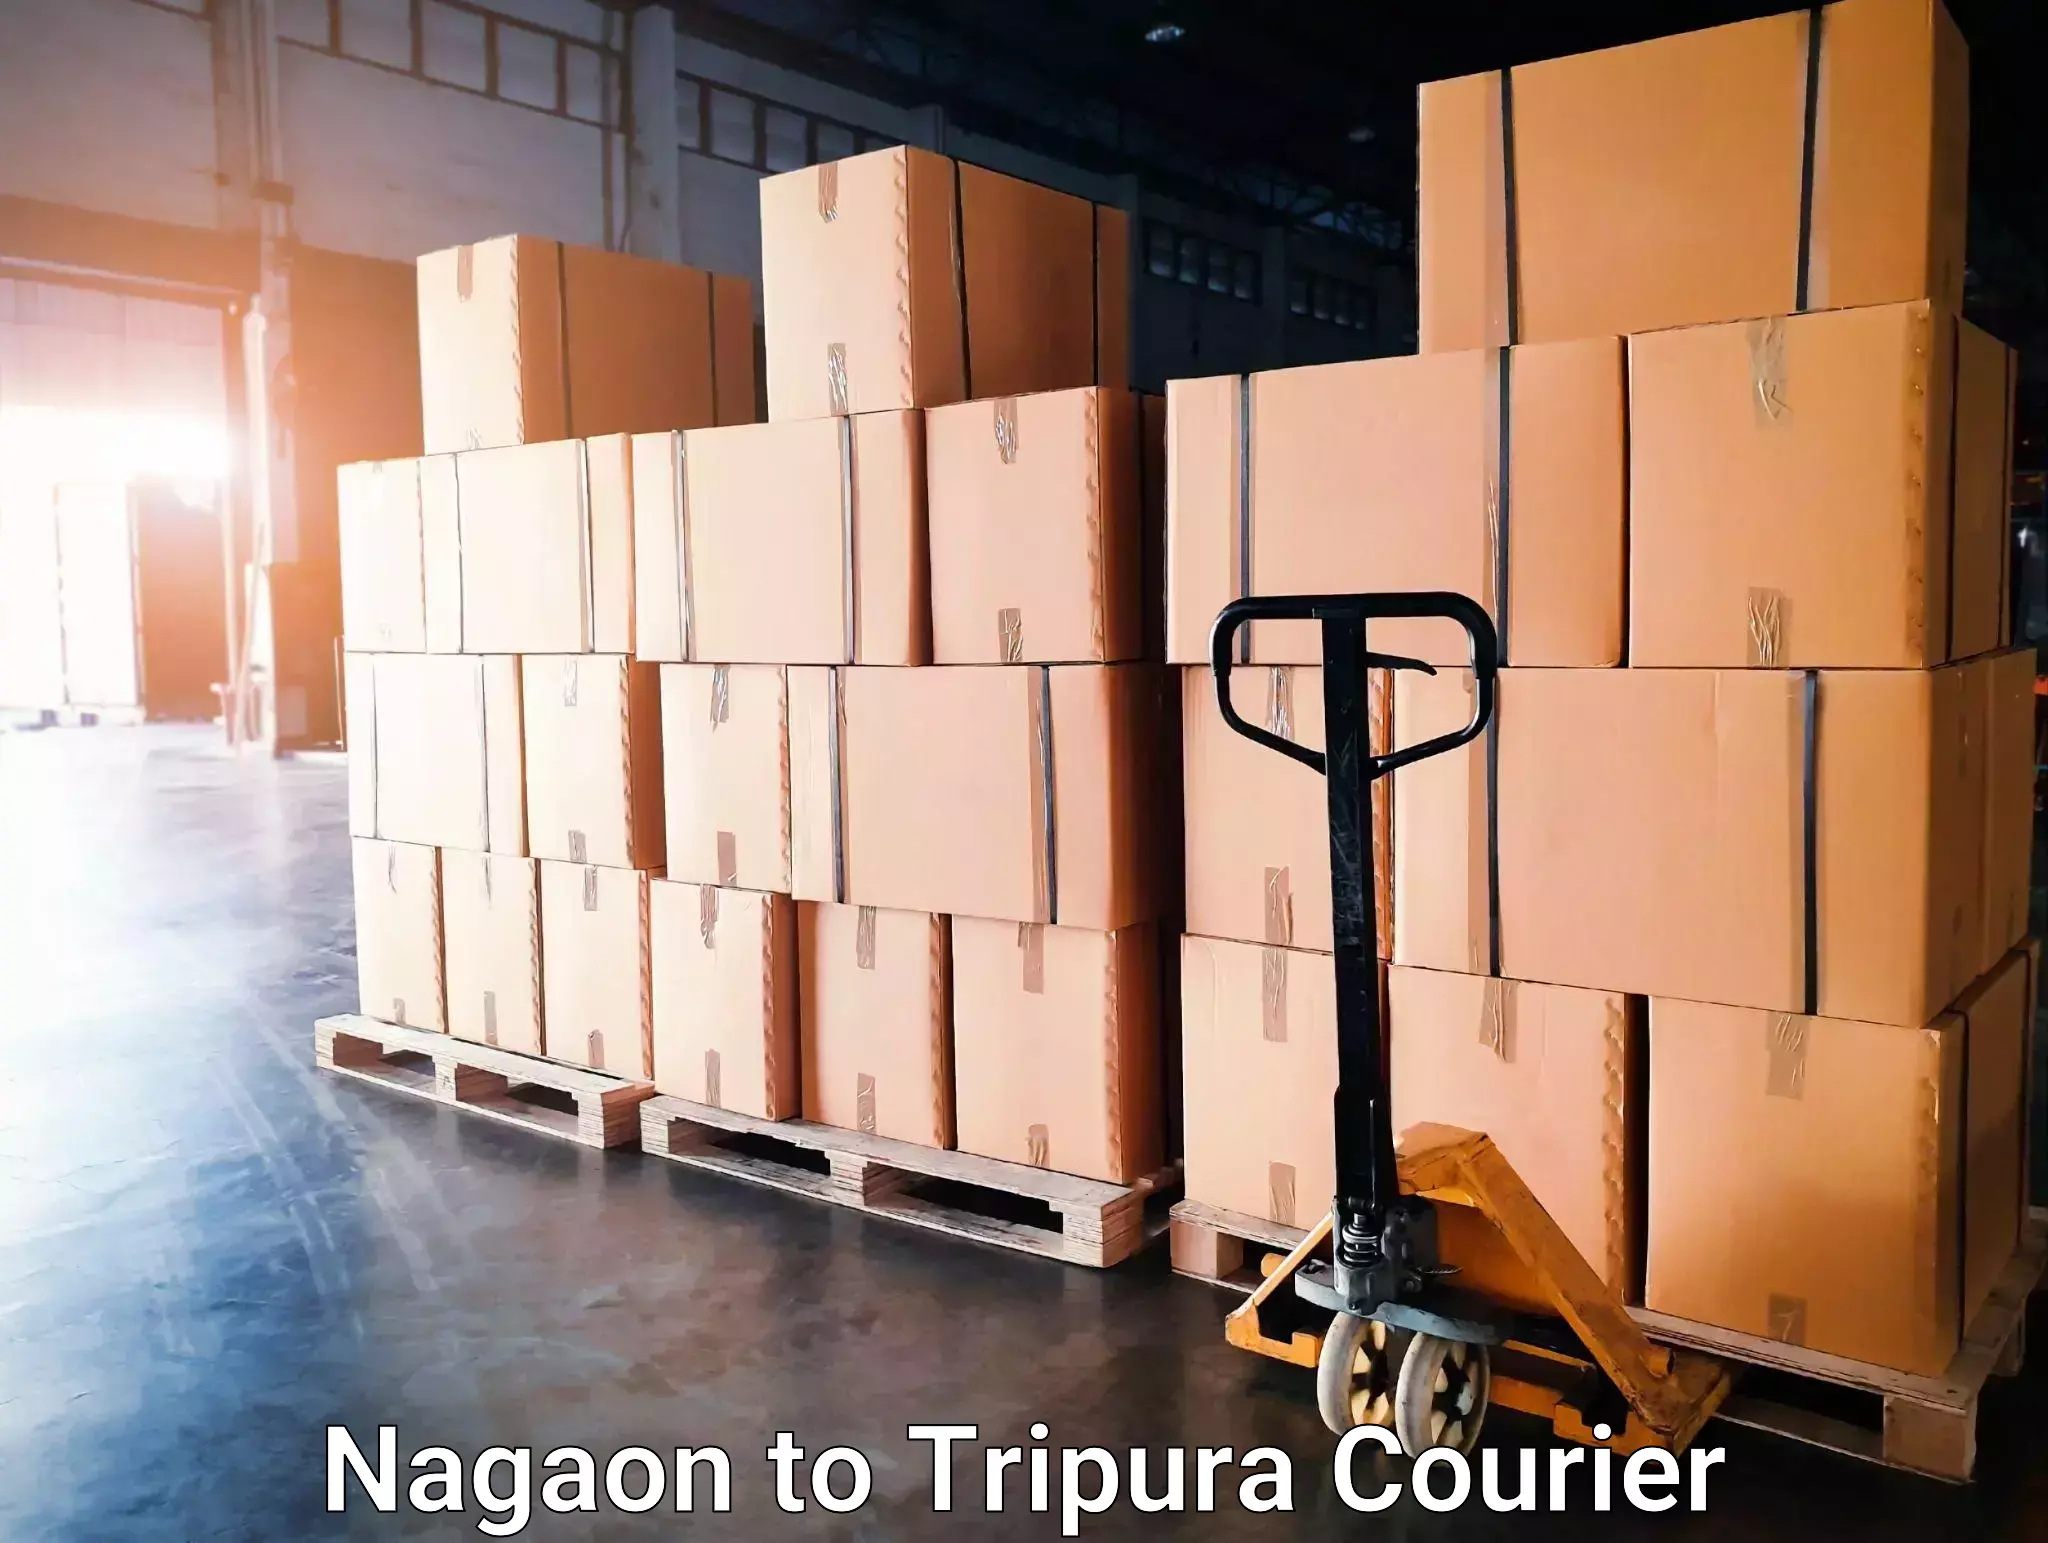 Nationwide delivery network Nagaon to Udaipur Tripura